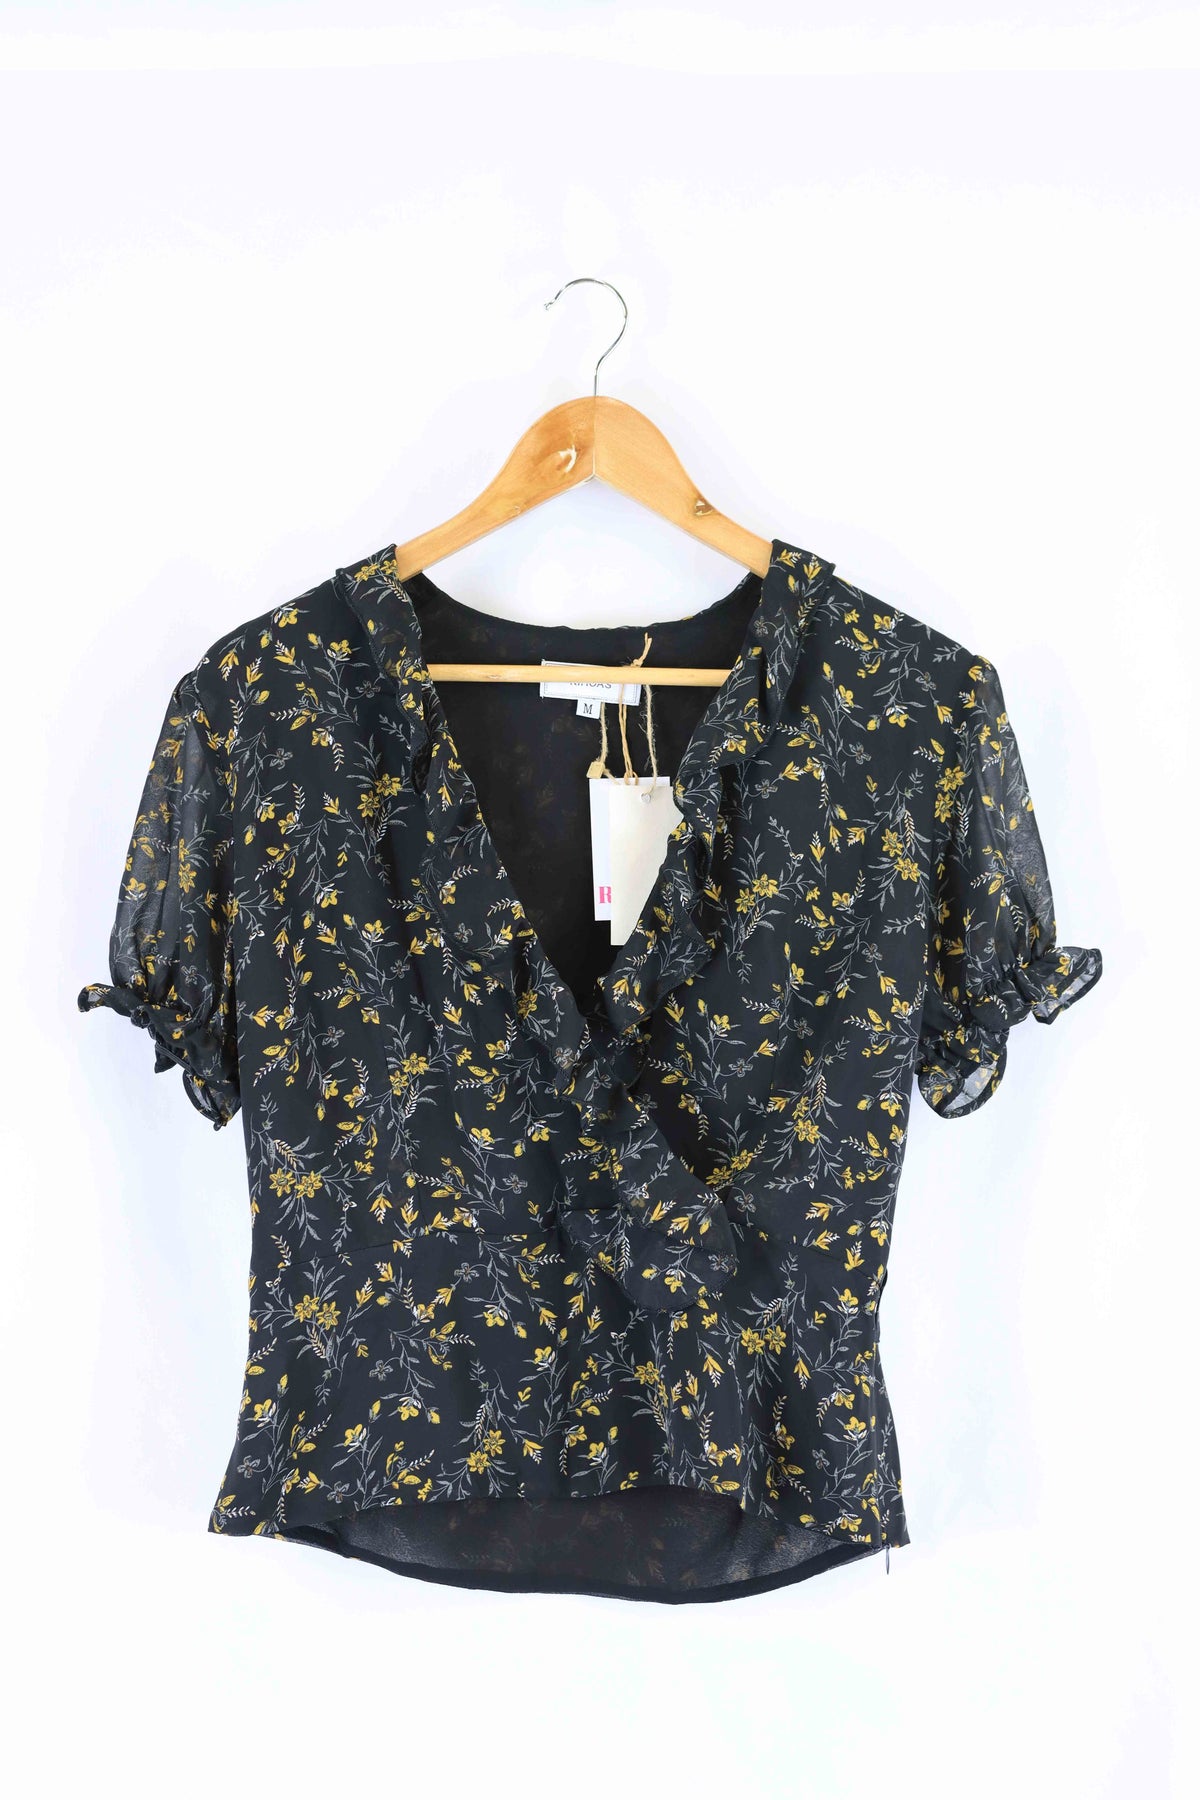 Rihoas Black and Yellow Floral Top M